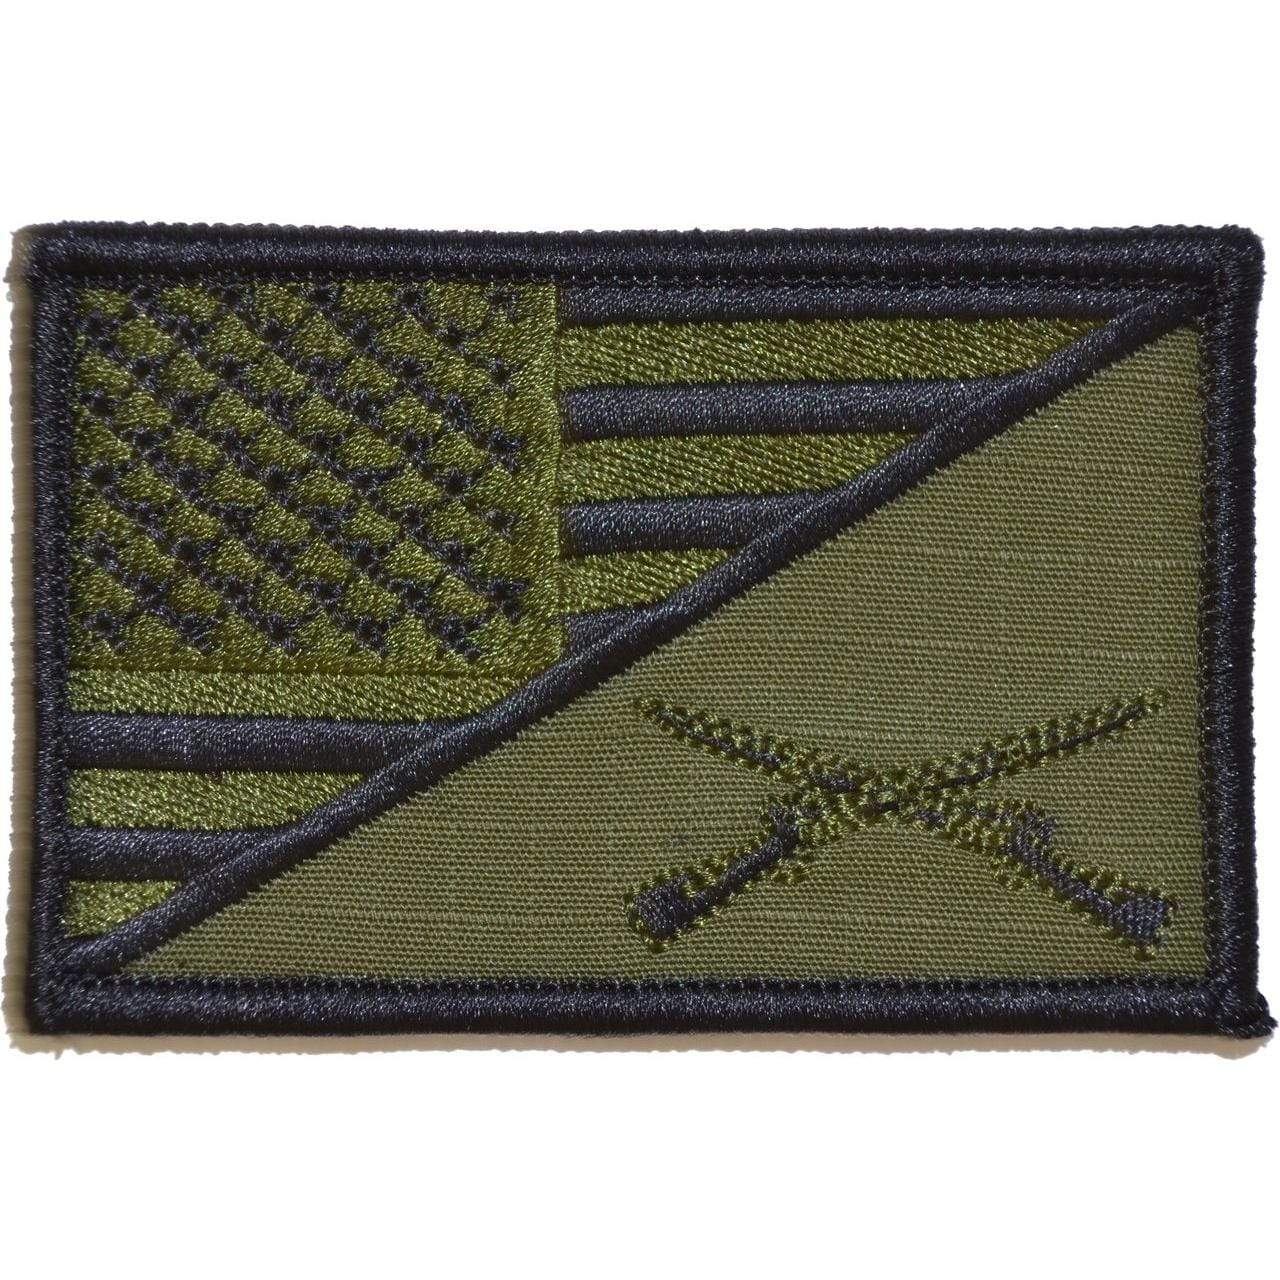 Tactical Gear Junkie Patches Olive Drab Rifle Cross Infantry USA Flag - 2.25x3.5 Patch